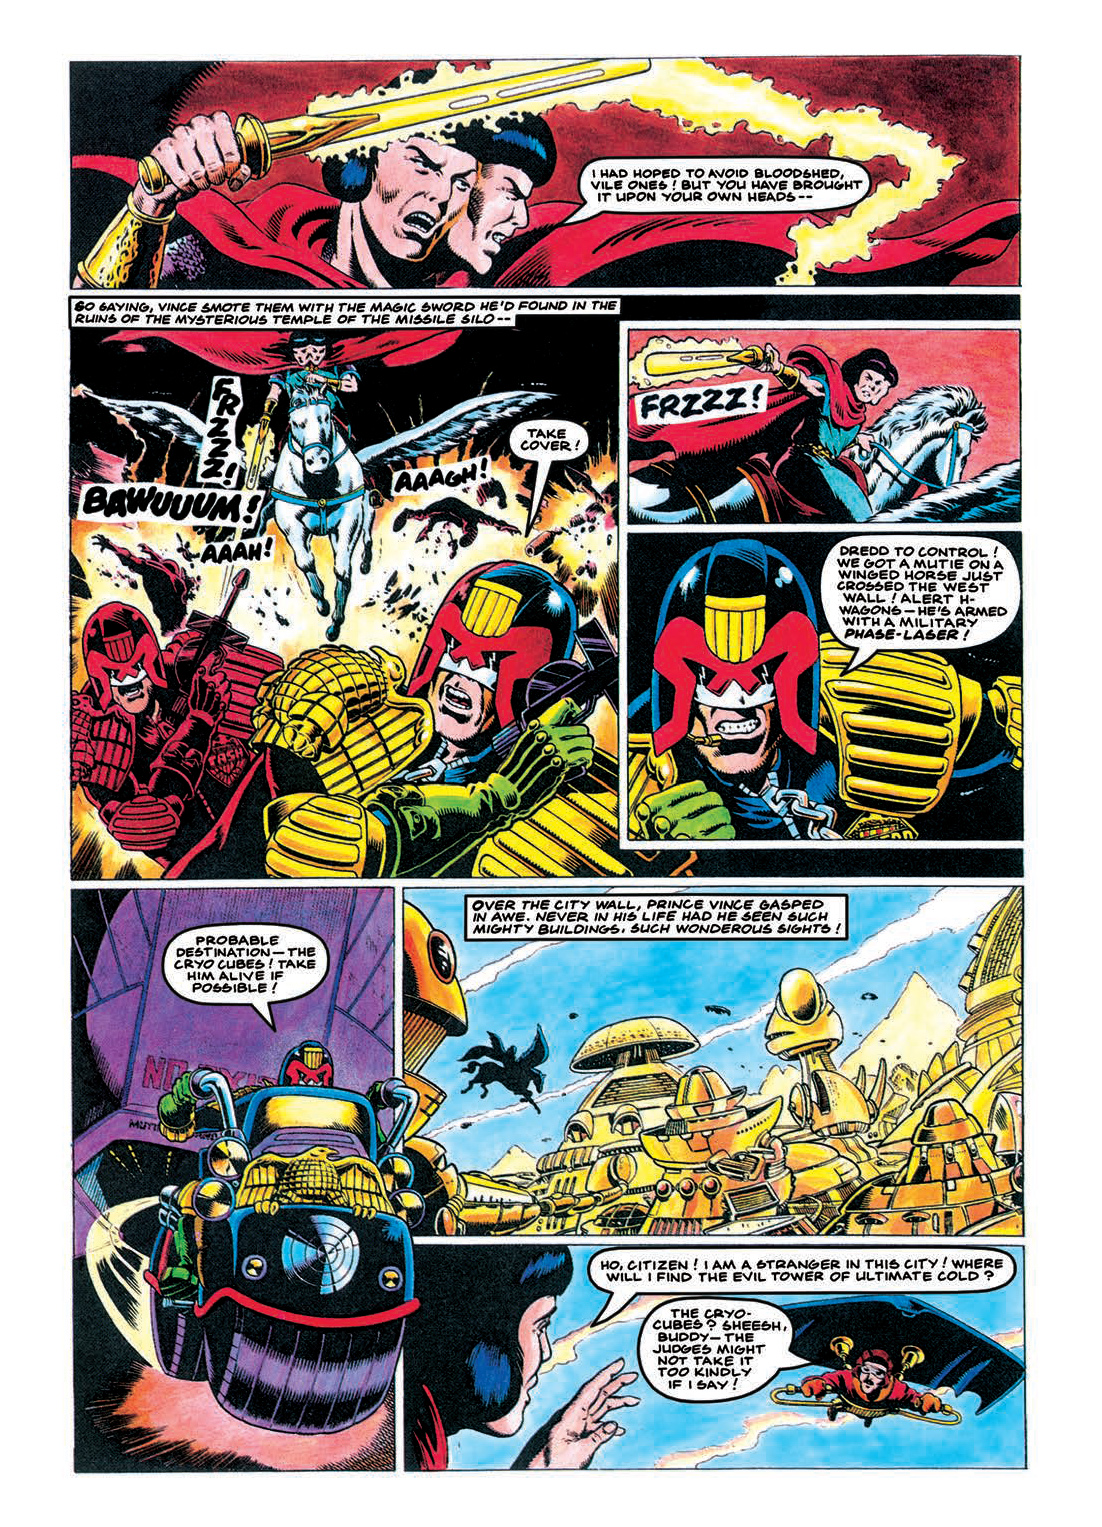 Read online Judge Dredd: The Restricted Files comic -  Issue # TPB 3 - 30